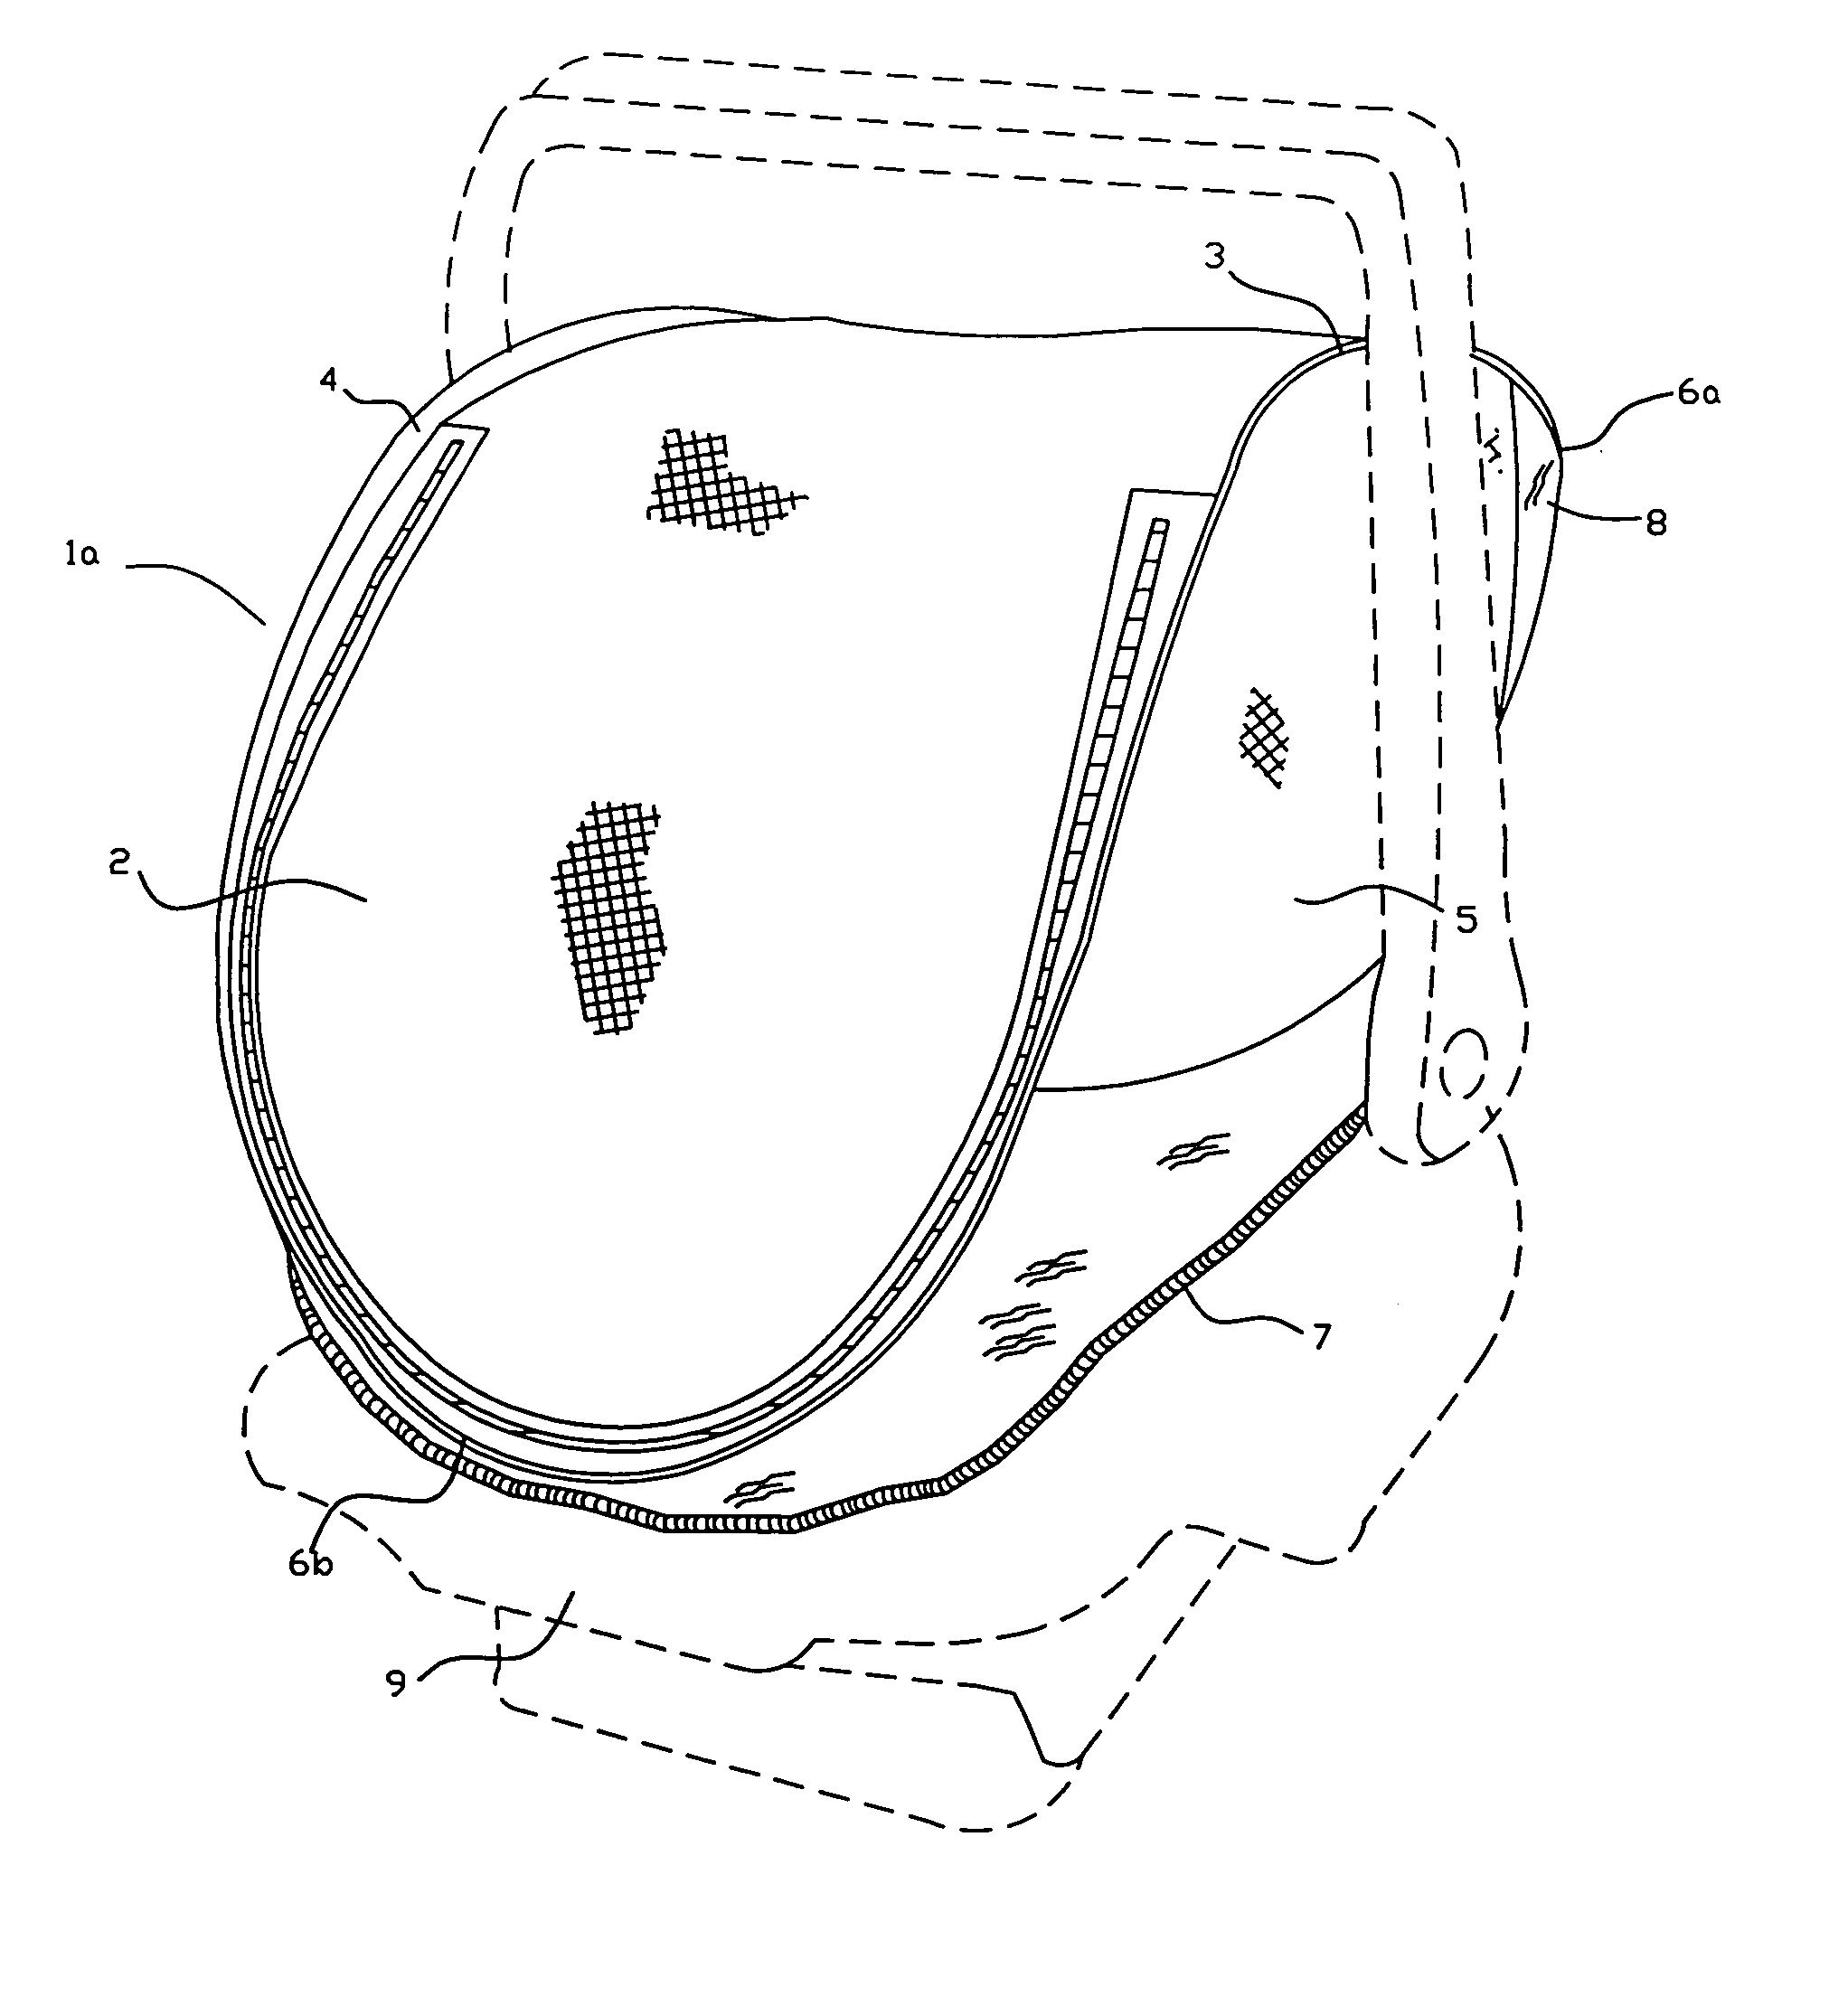 Collapsible cover for seating unit